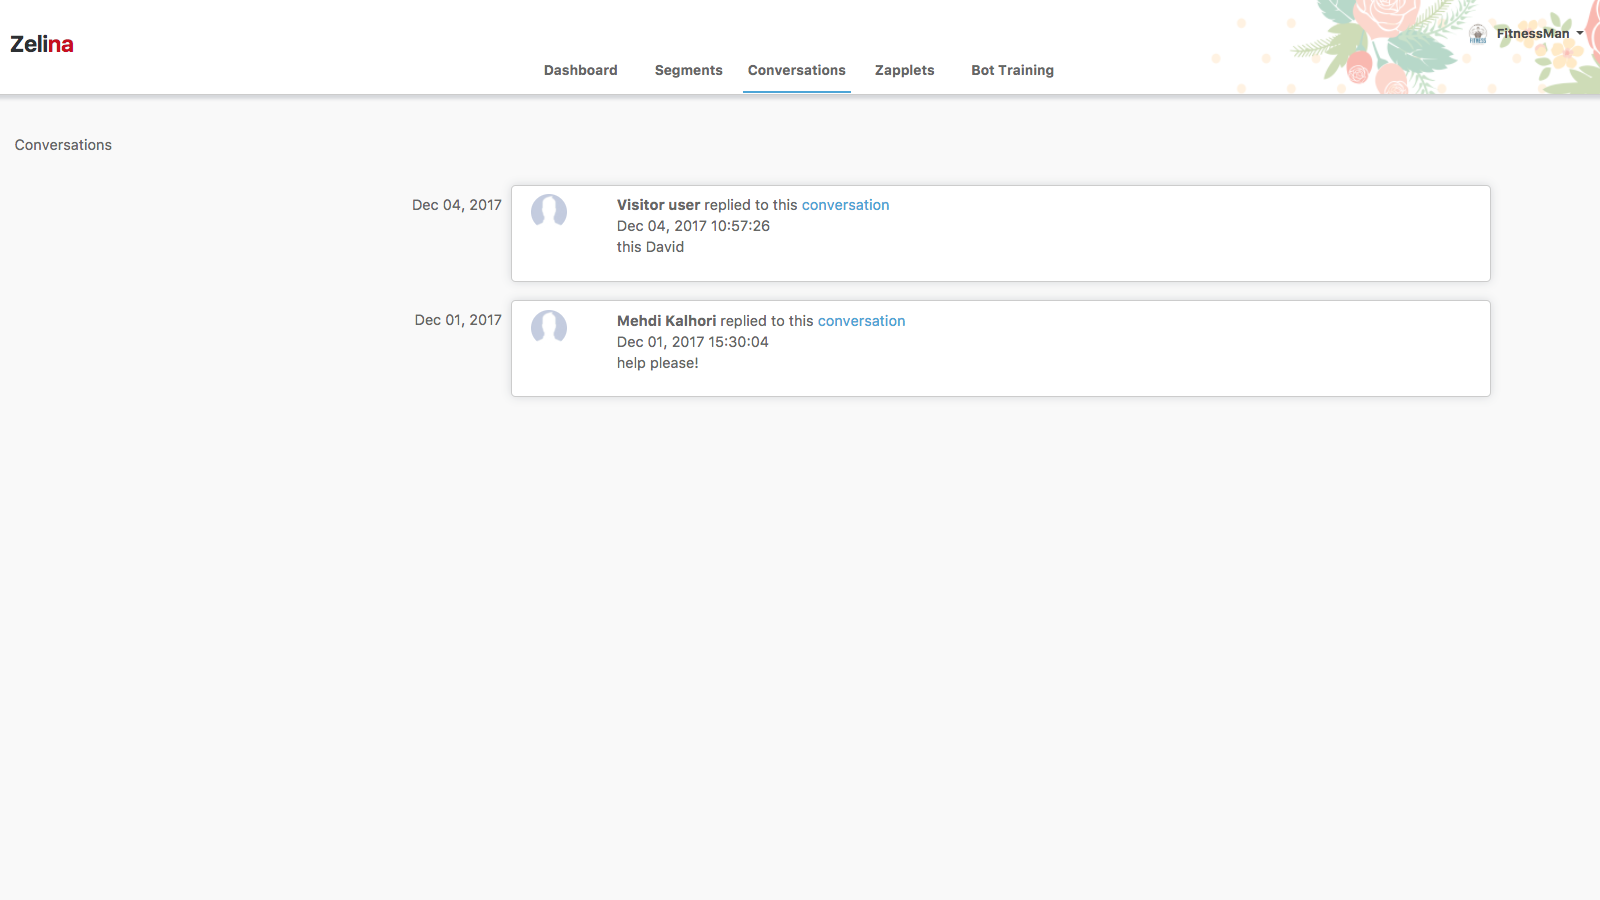 View all conversations through your admin dashboard.